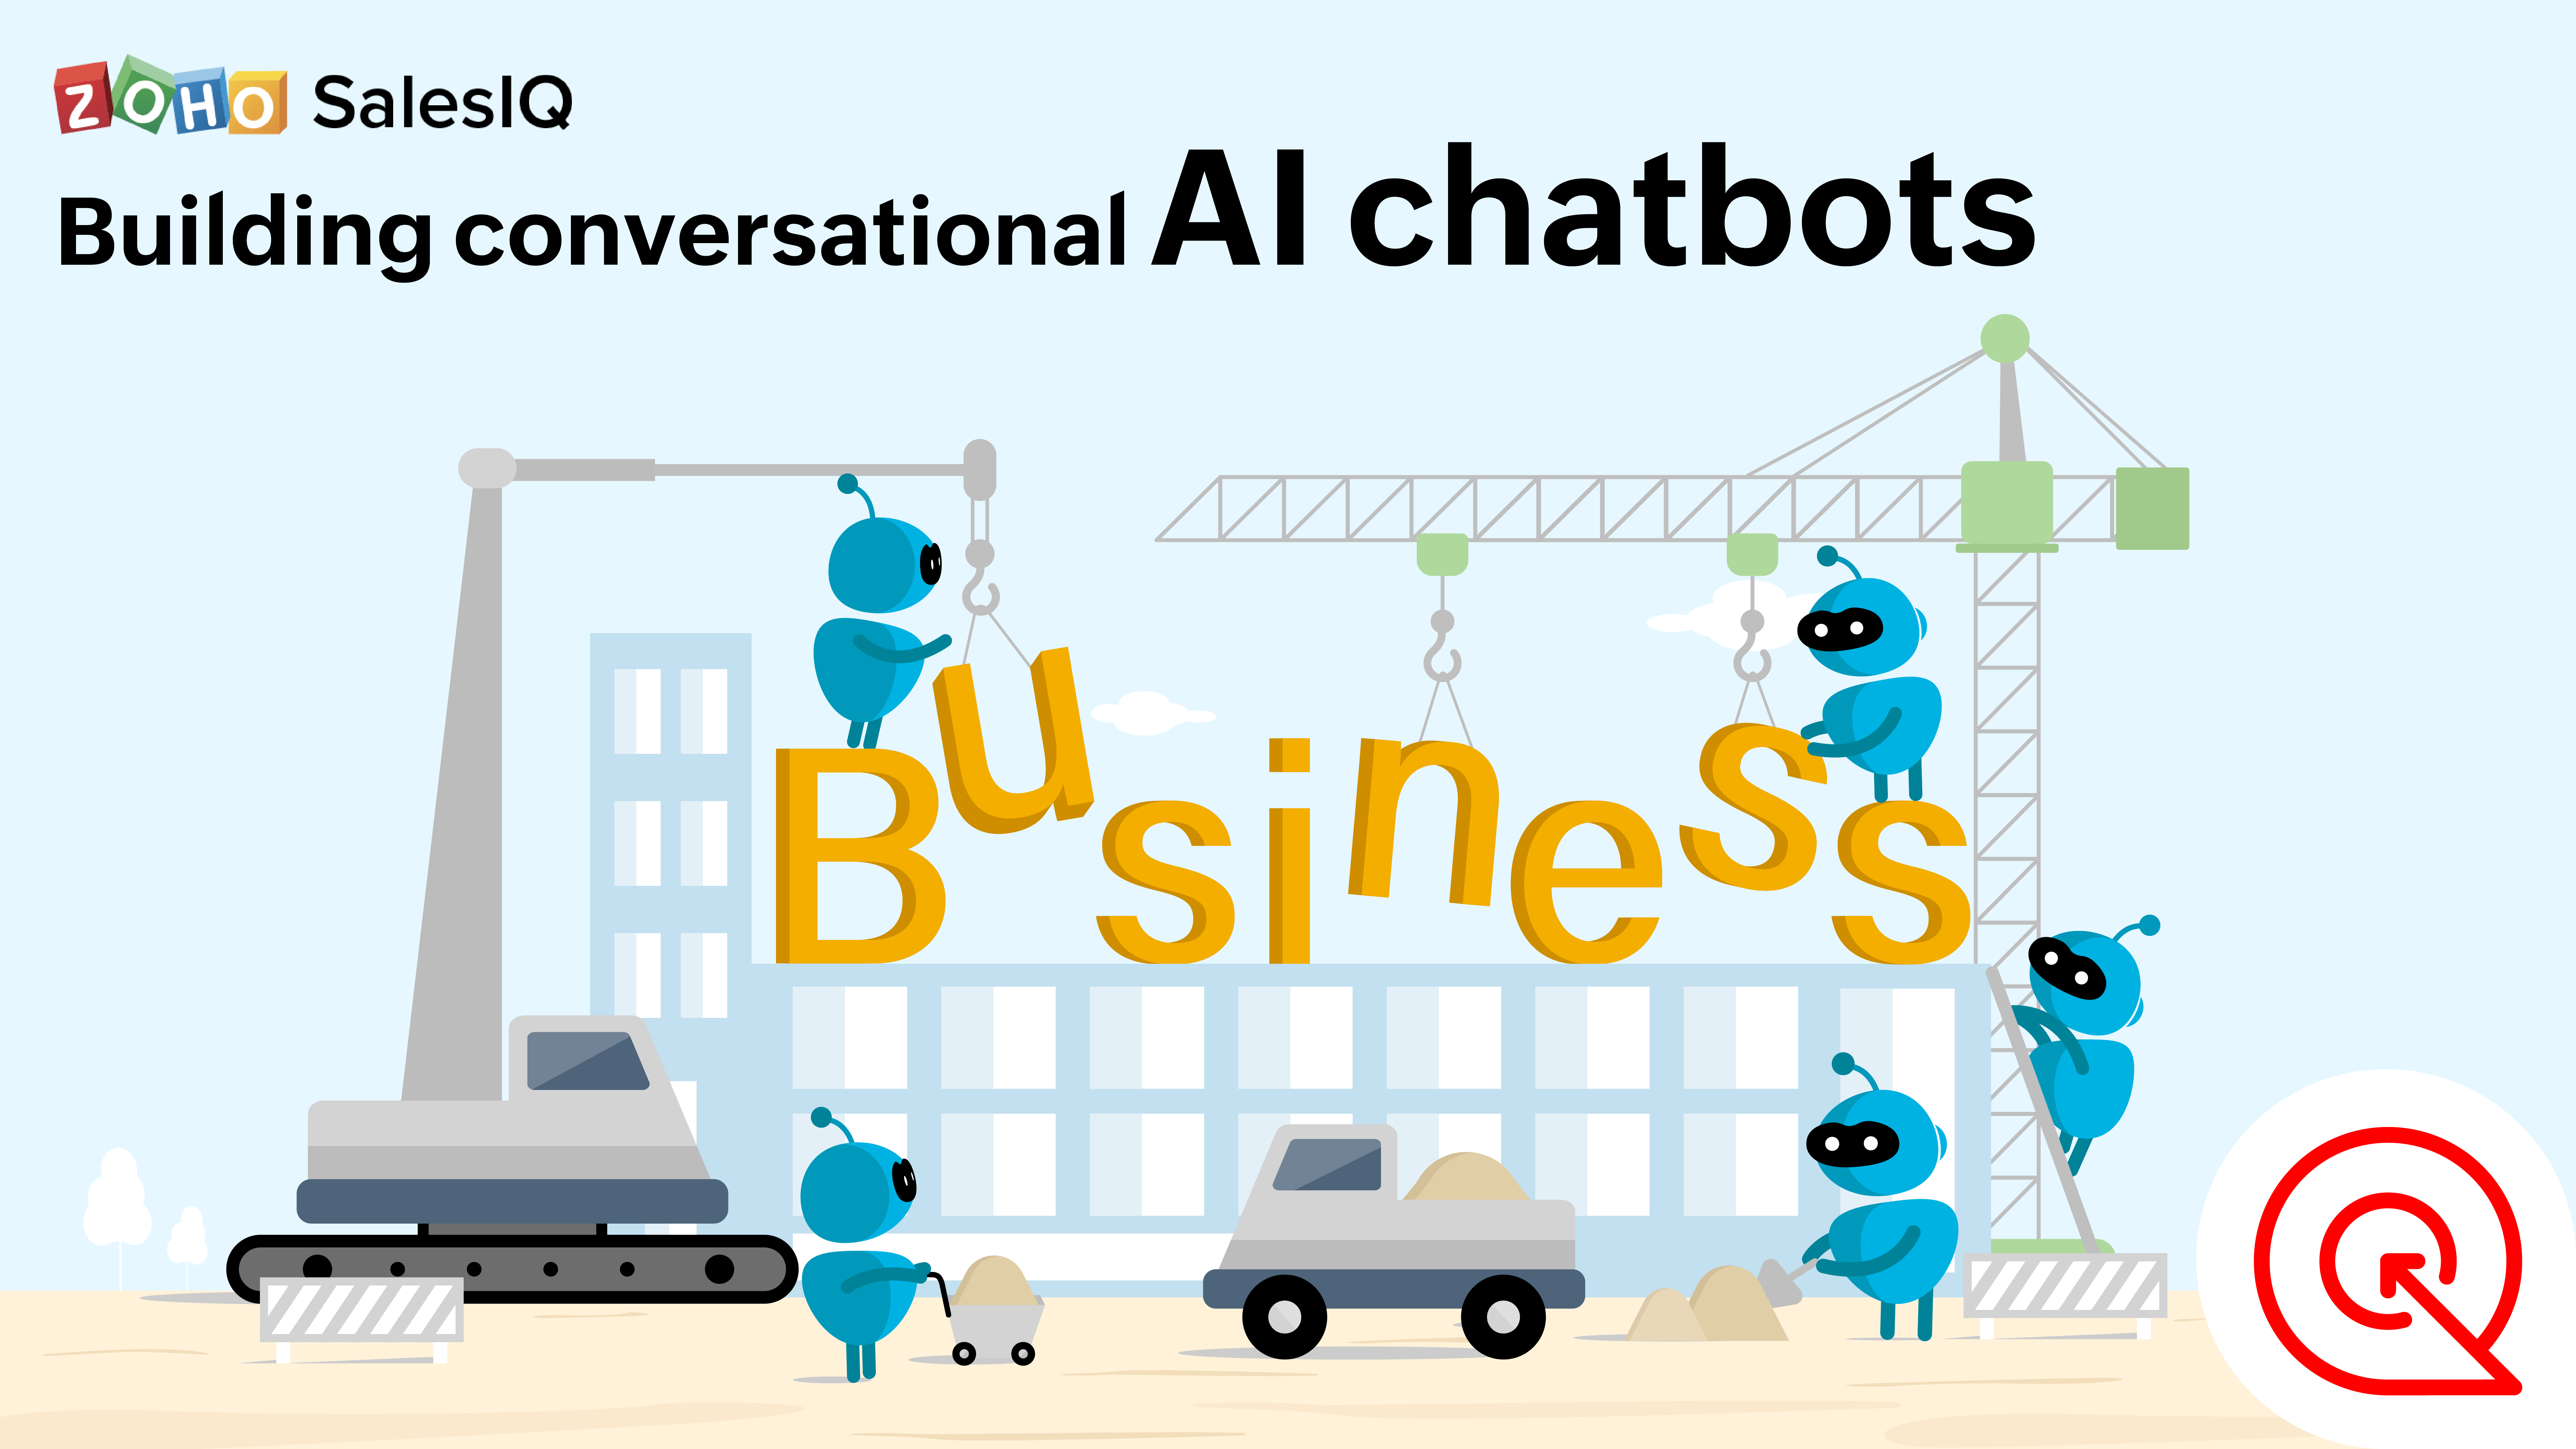 How to build chatbots with conversational AI?